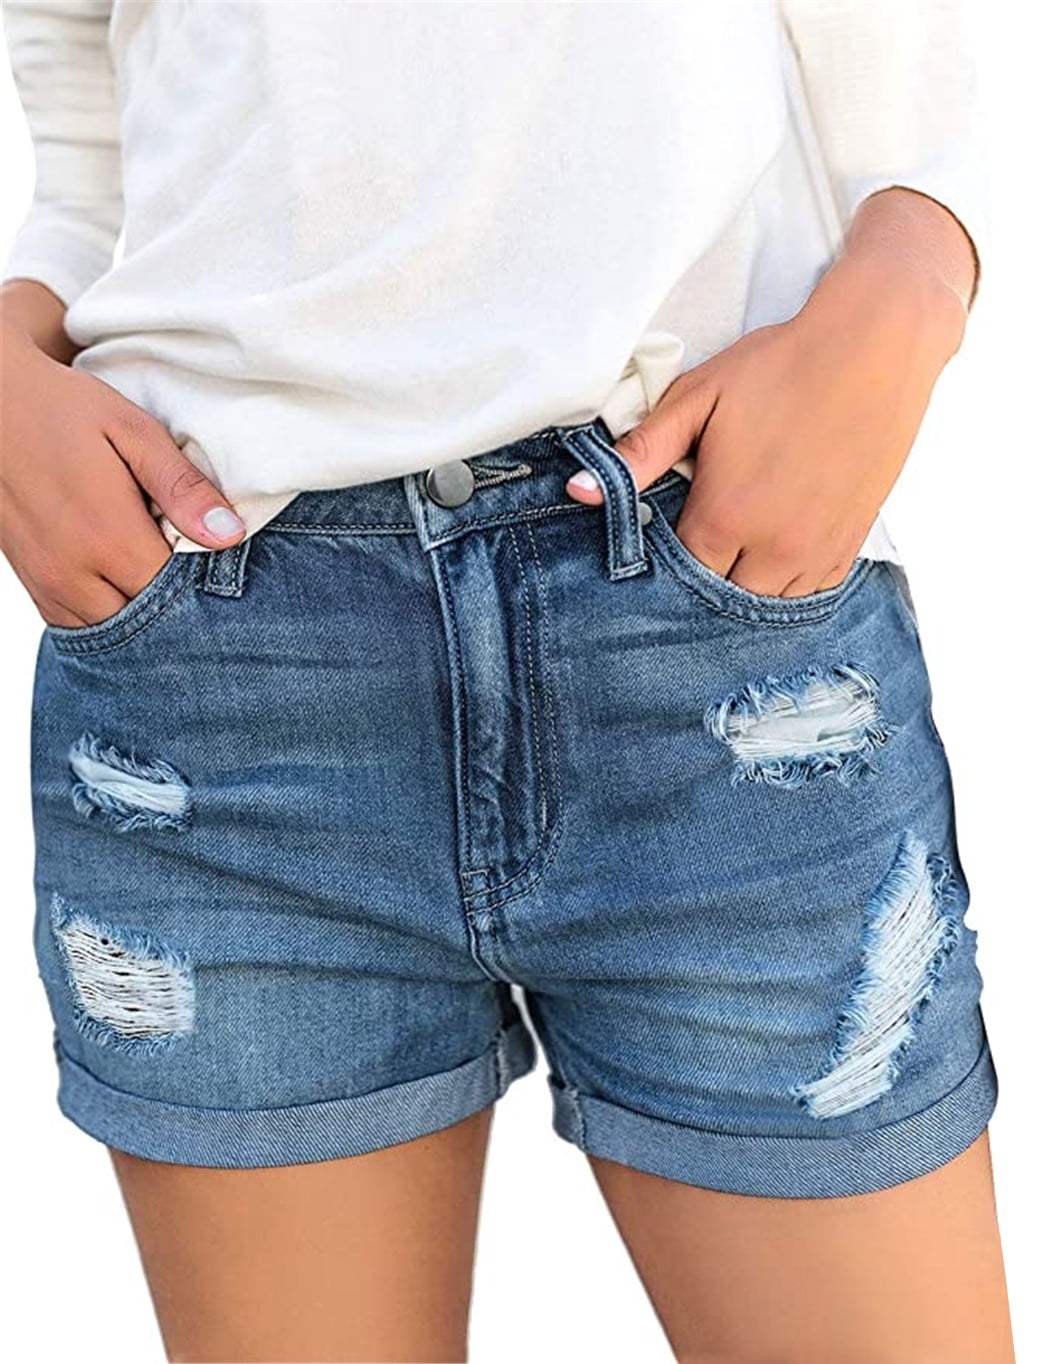 ONLYSHE Denim Shorts for Women Jeans with Pockets Light Blue Stretchy Shorts  M